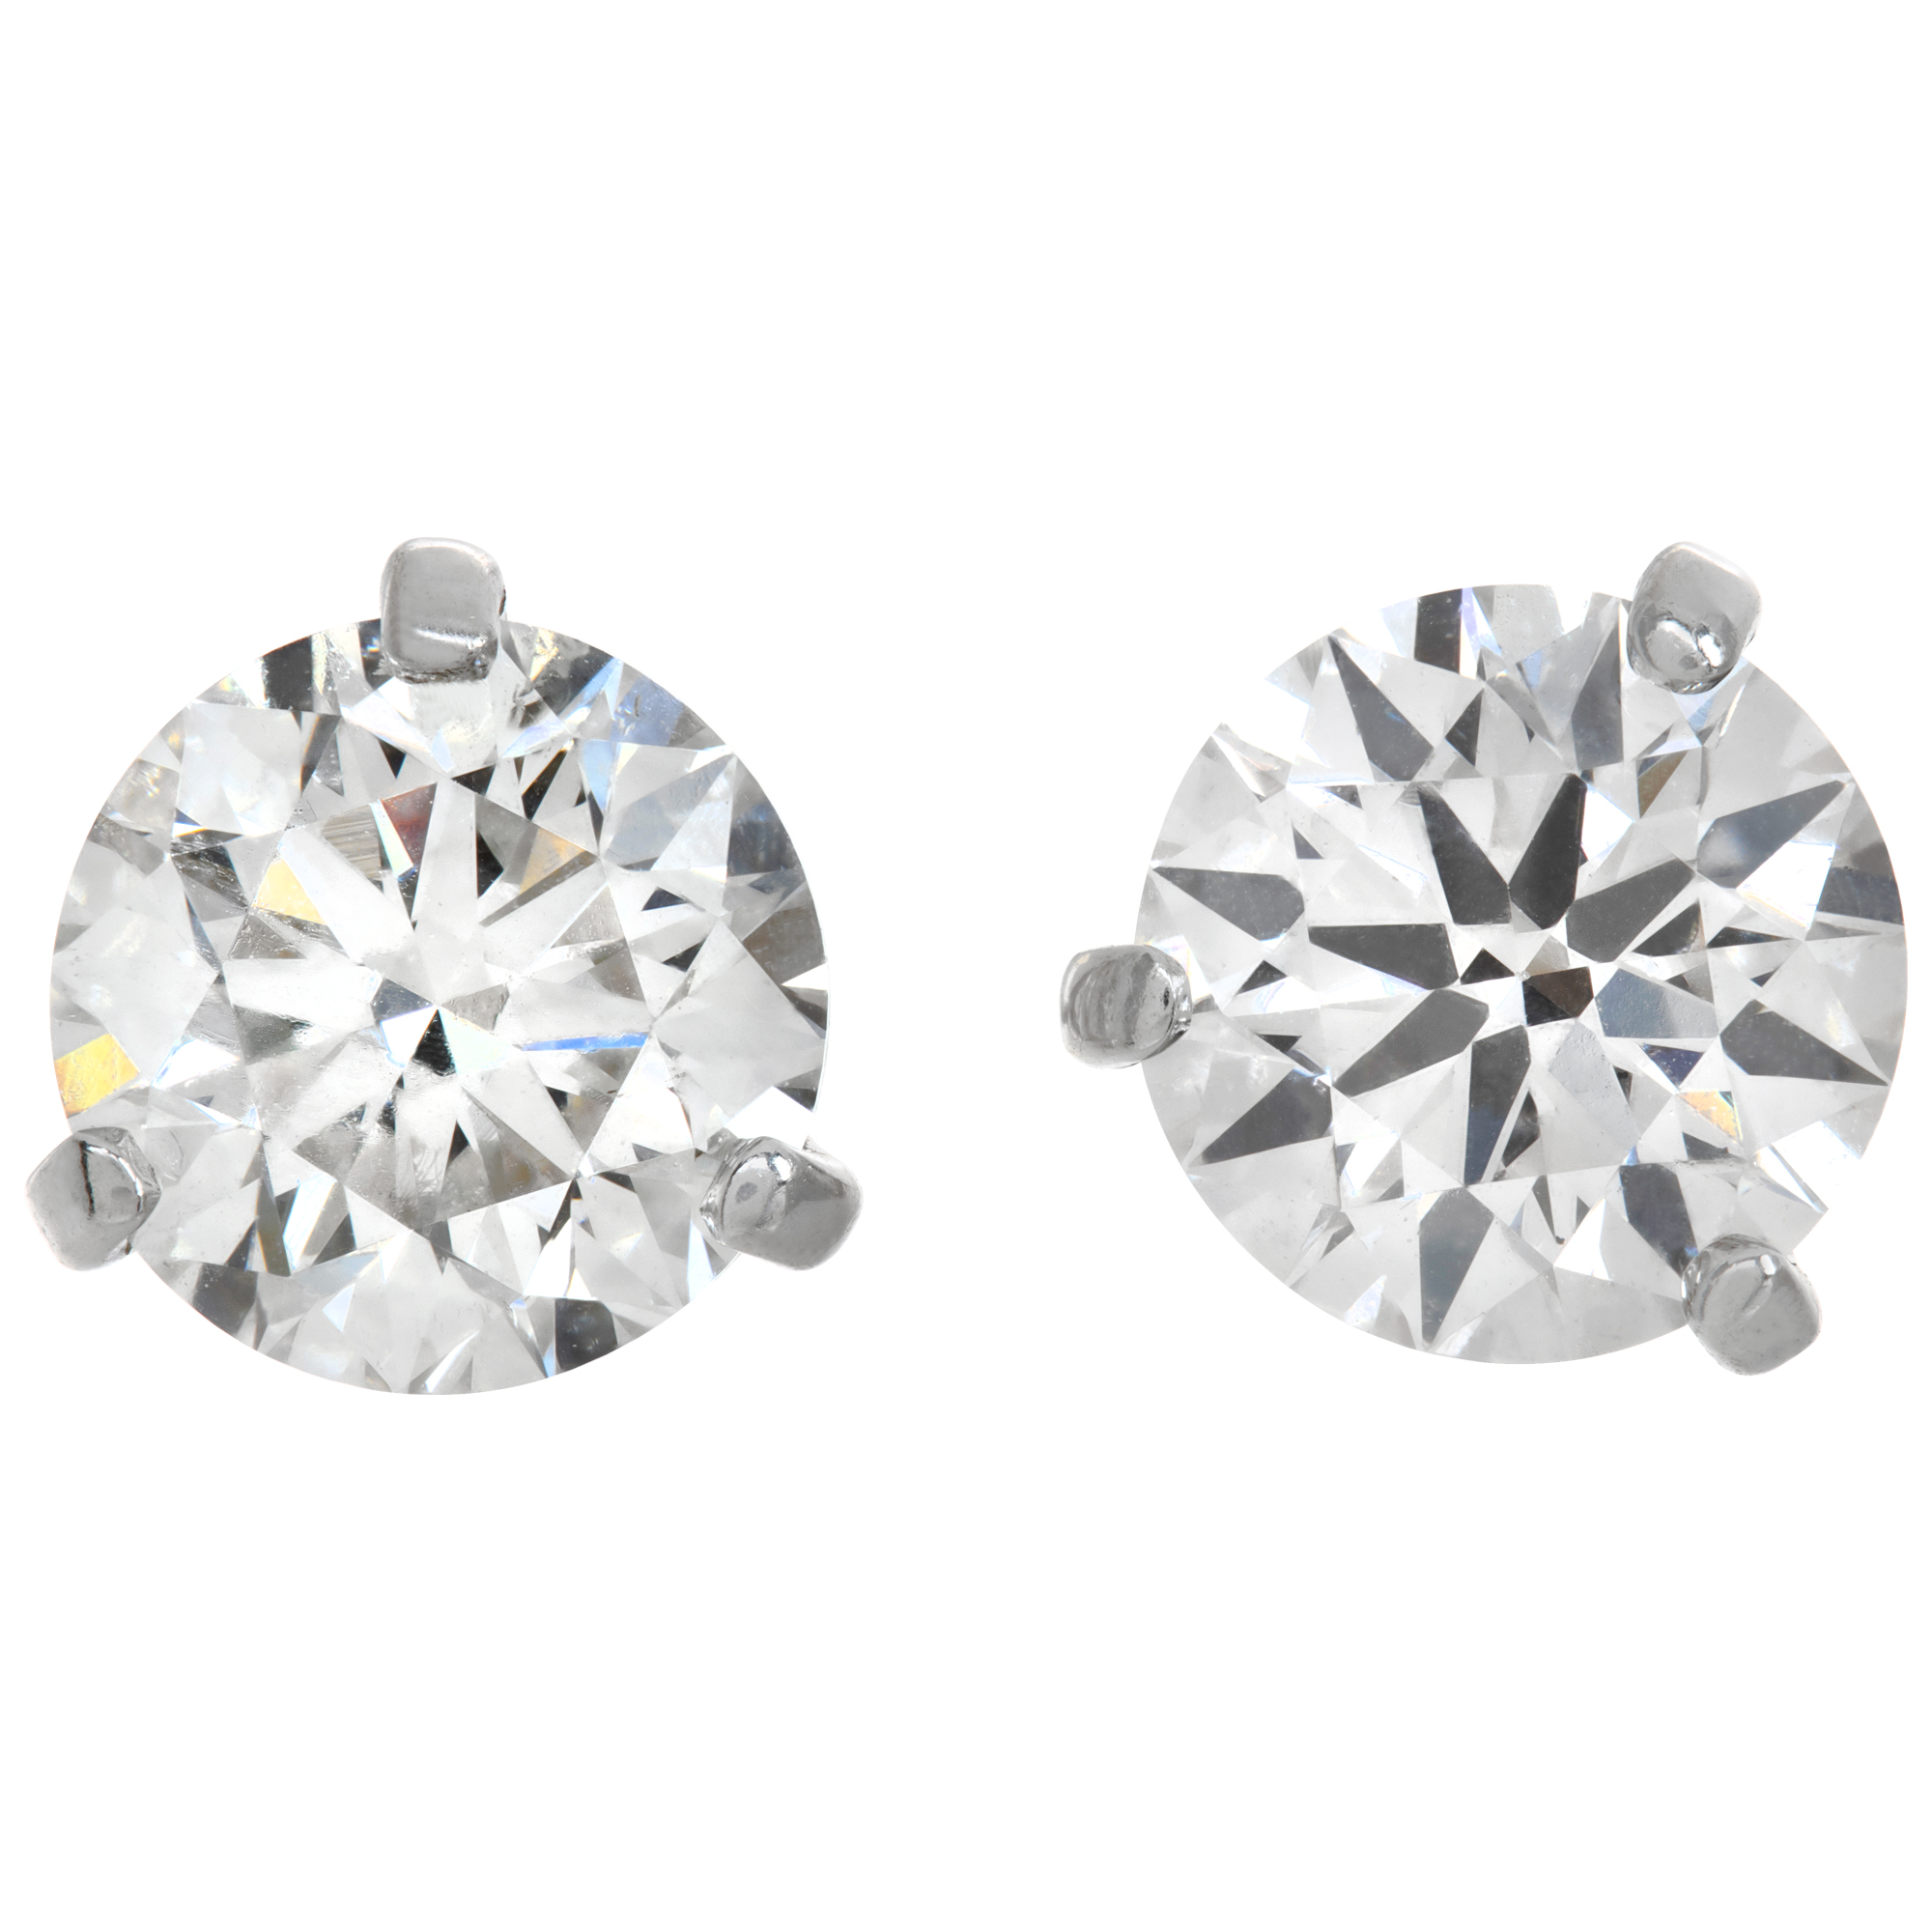 GIA certified round brilliant cut diamond studs 1.17 (I color, SI2 clarity) and 1.08 (I color, SI1)